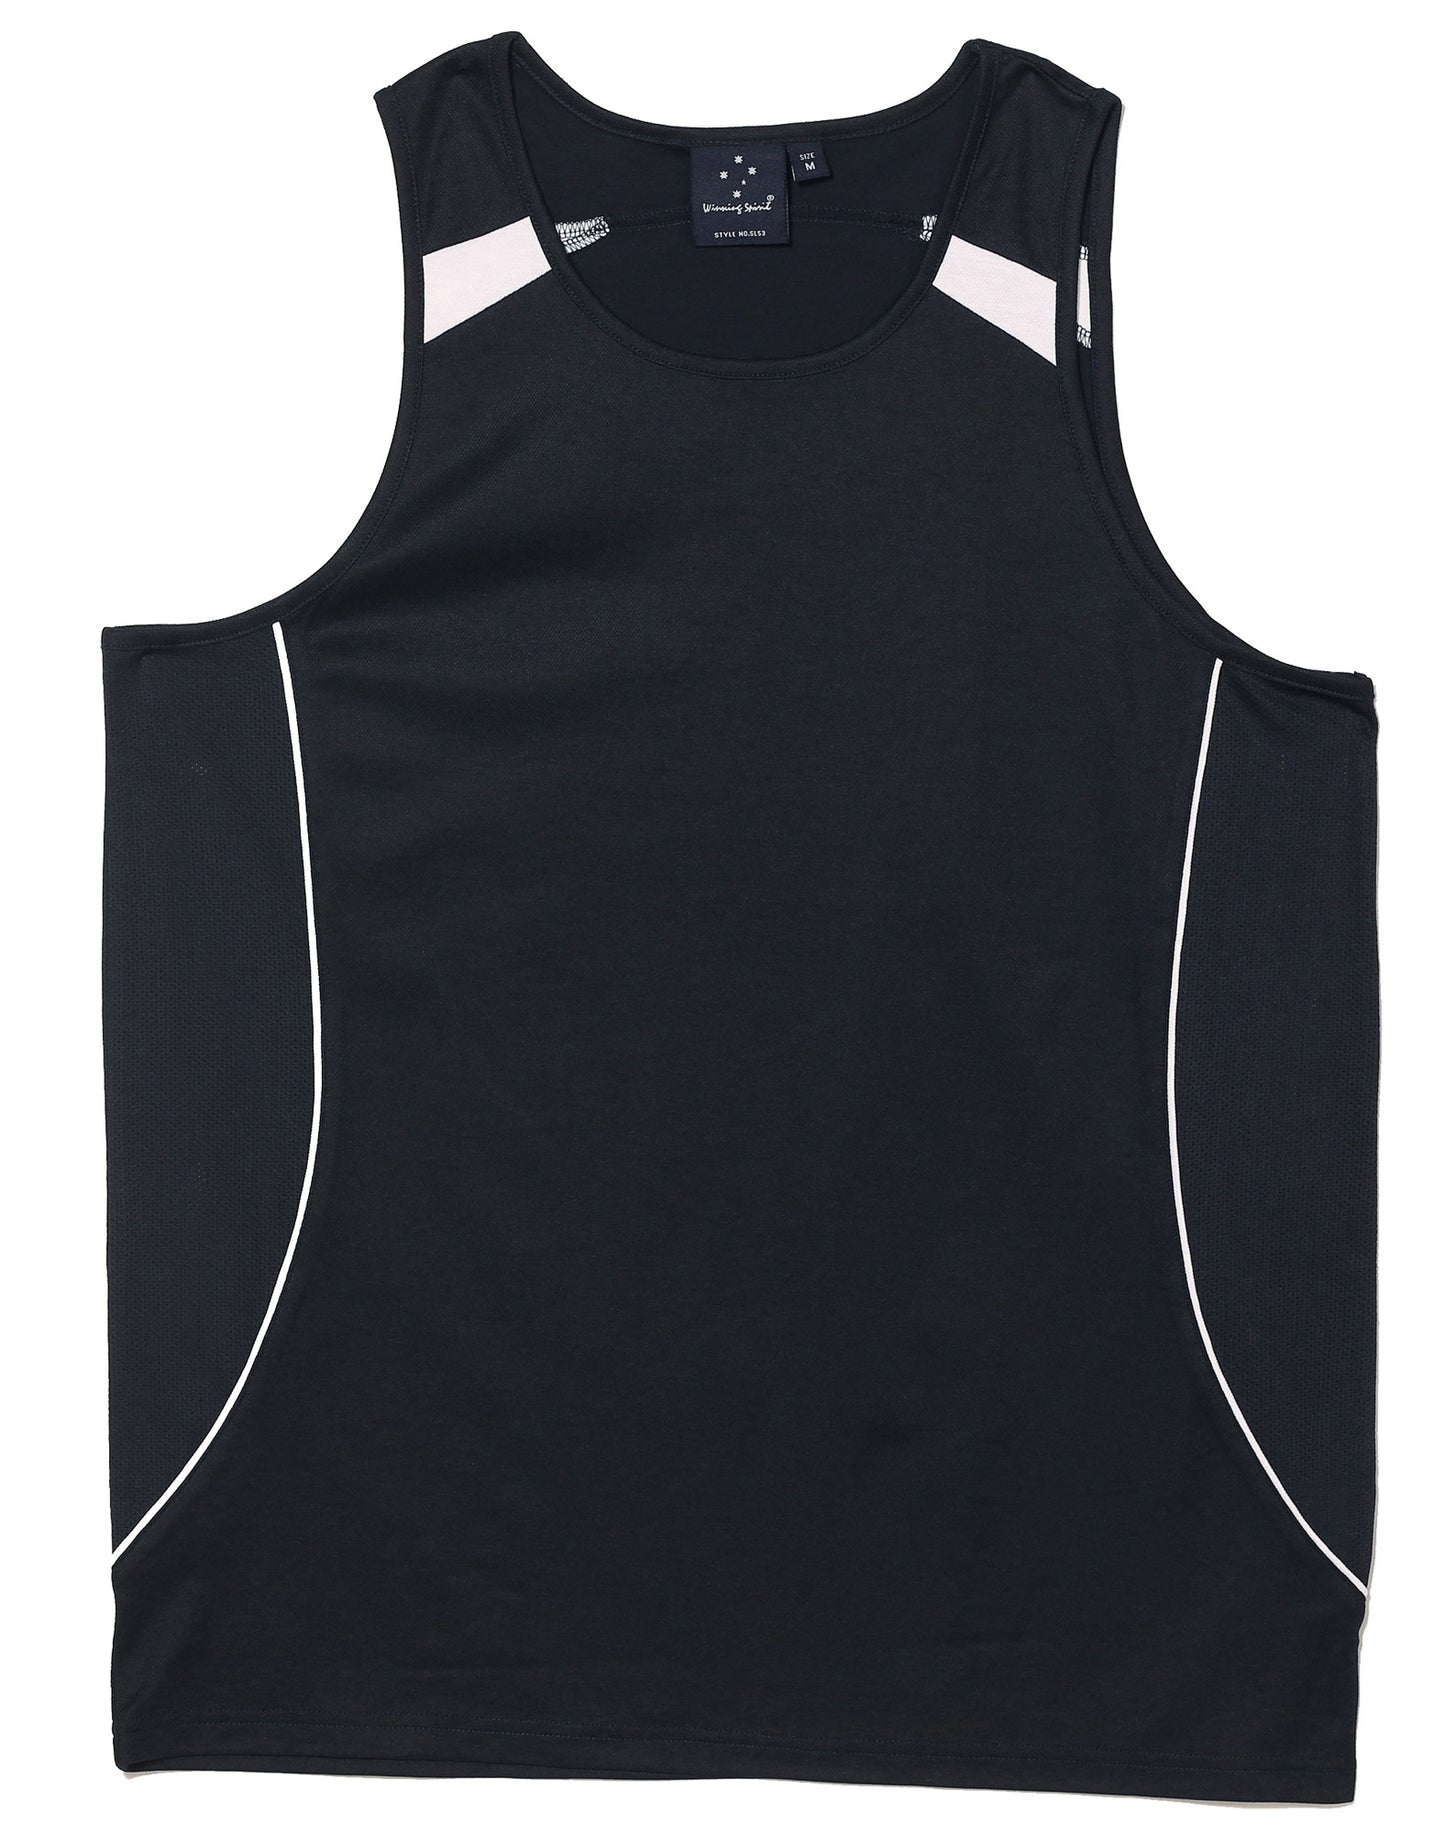 Legend Cotton Back Singlet - made by AIW